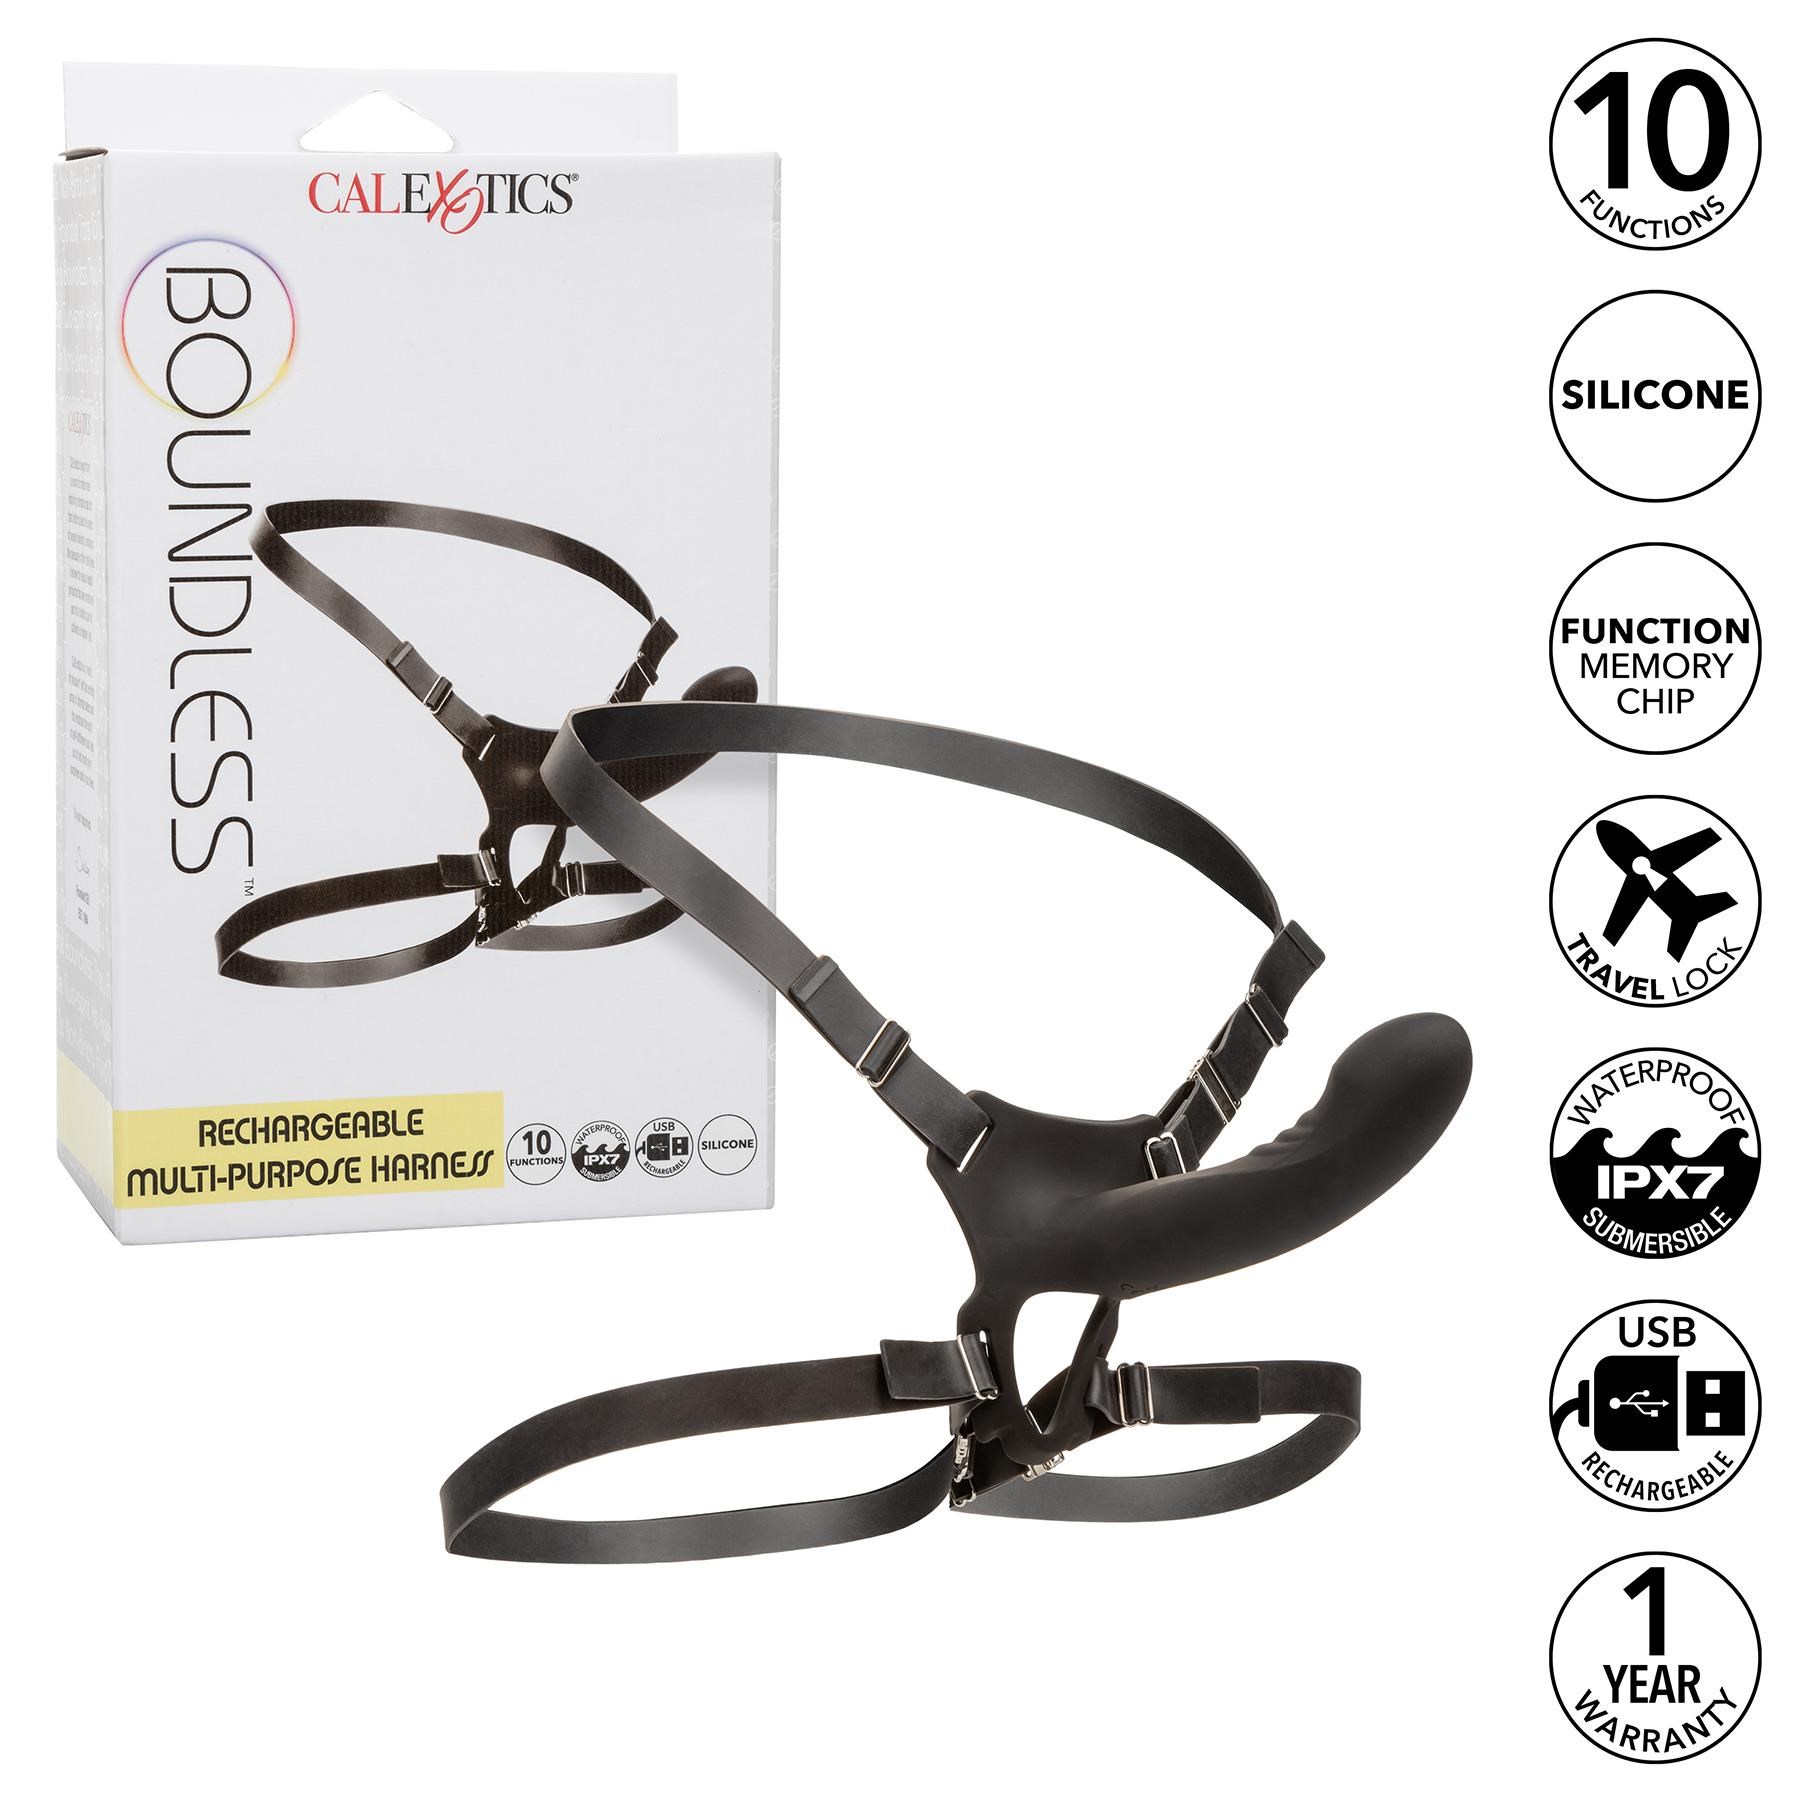 Boundless Rechargeable Multi-Purpose Harness - Features